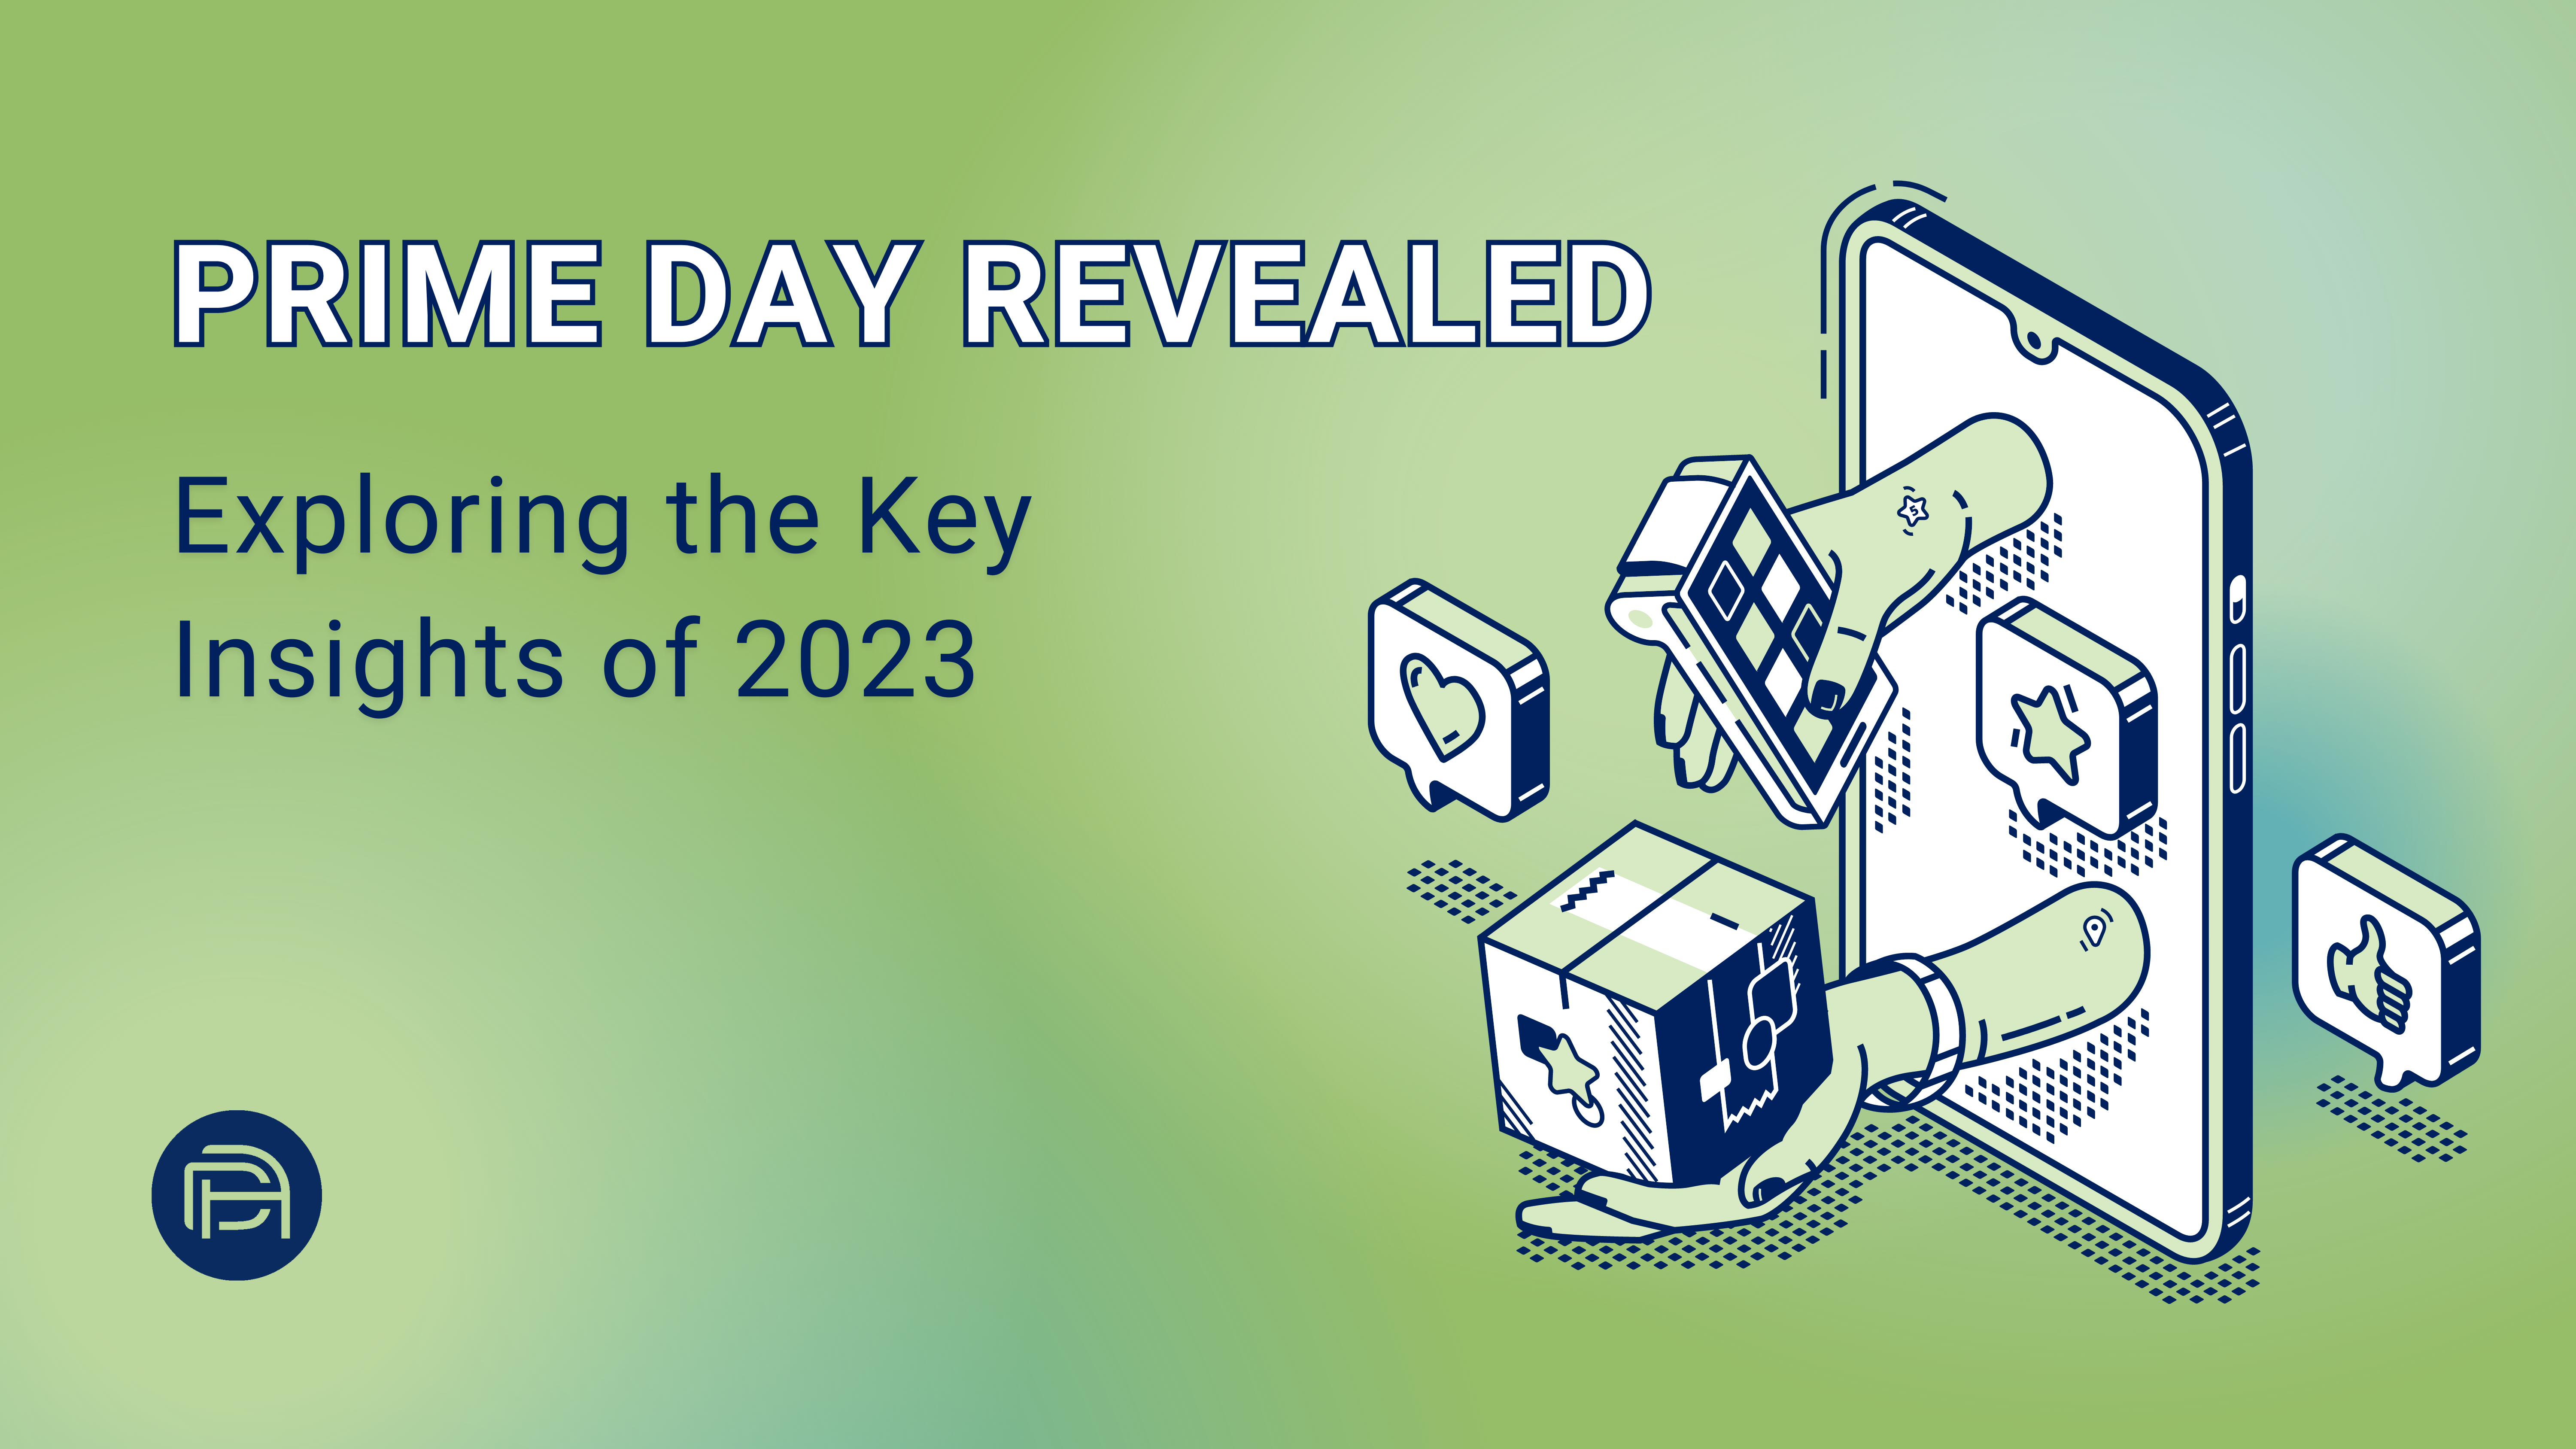 Prime Day Revealed: Exploring the Key Insights of 2023